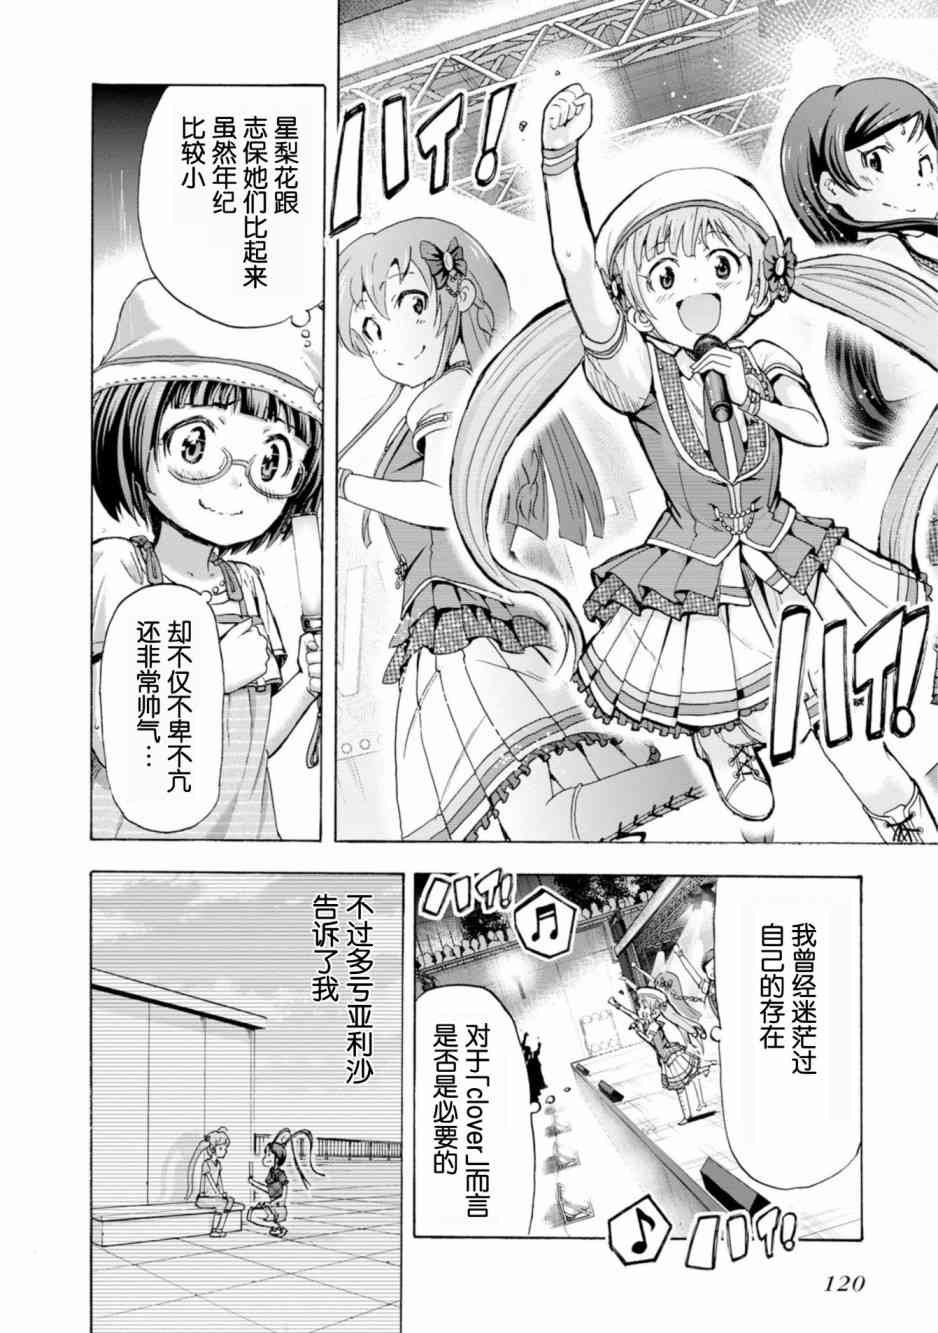 THE IDOLM@STER MILLION LIVE! Blooming Clover - 18話(1/2) - 8